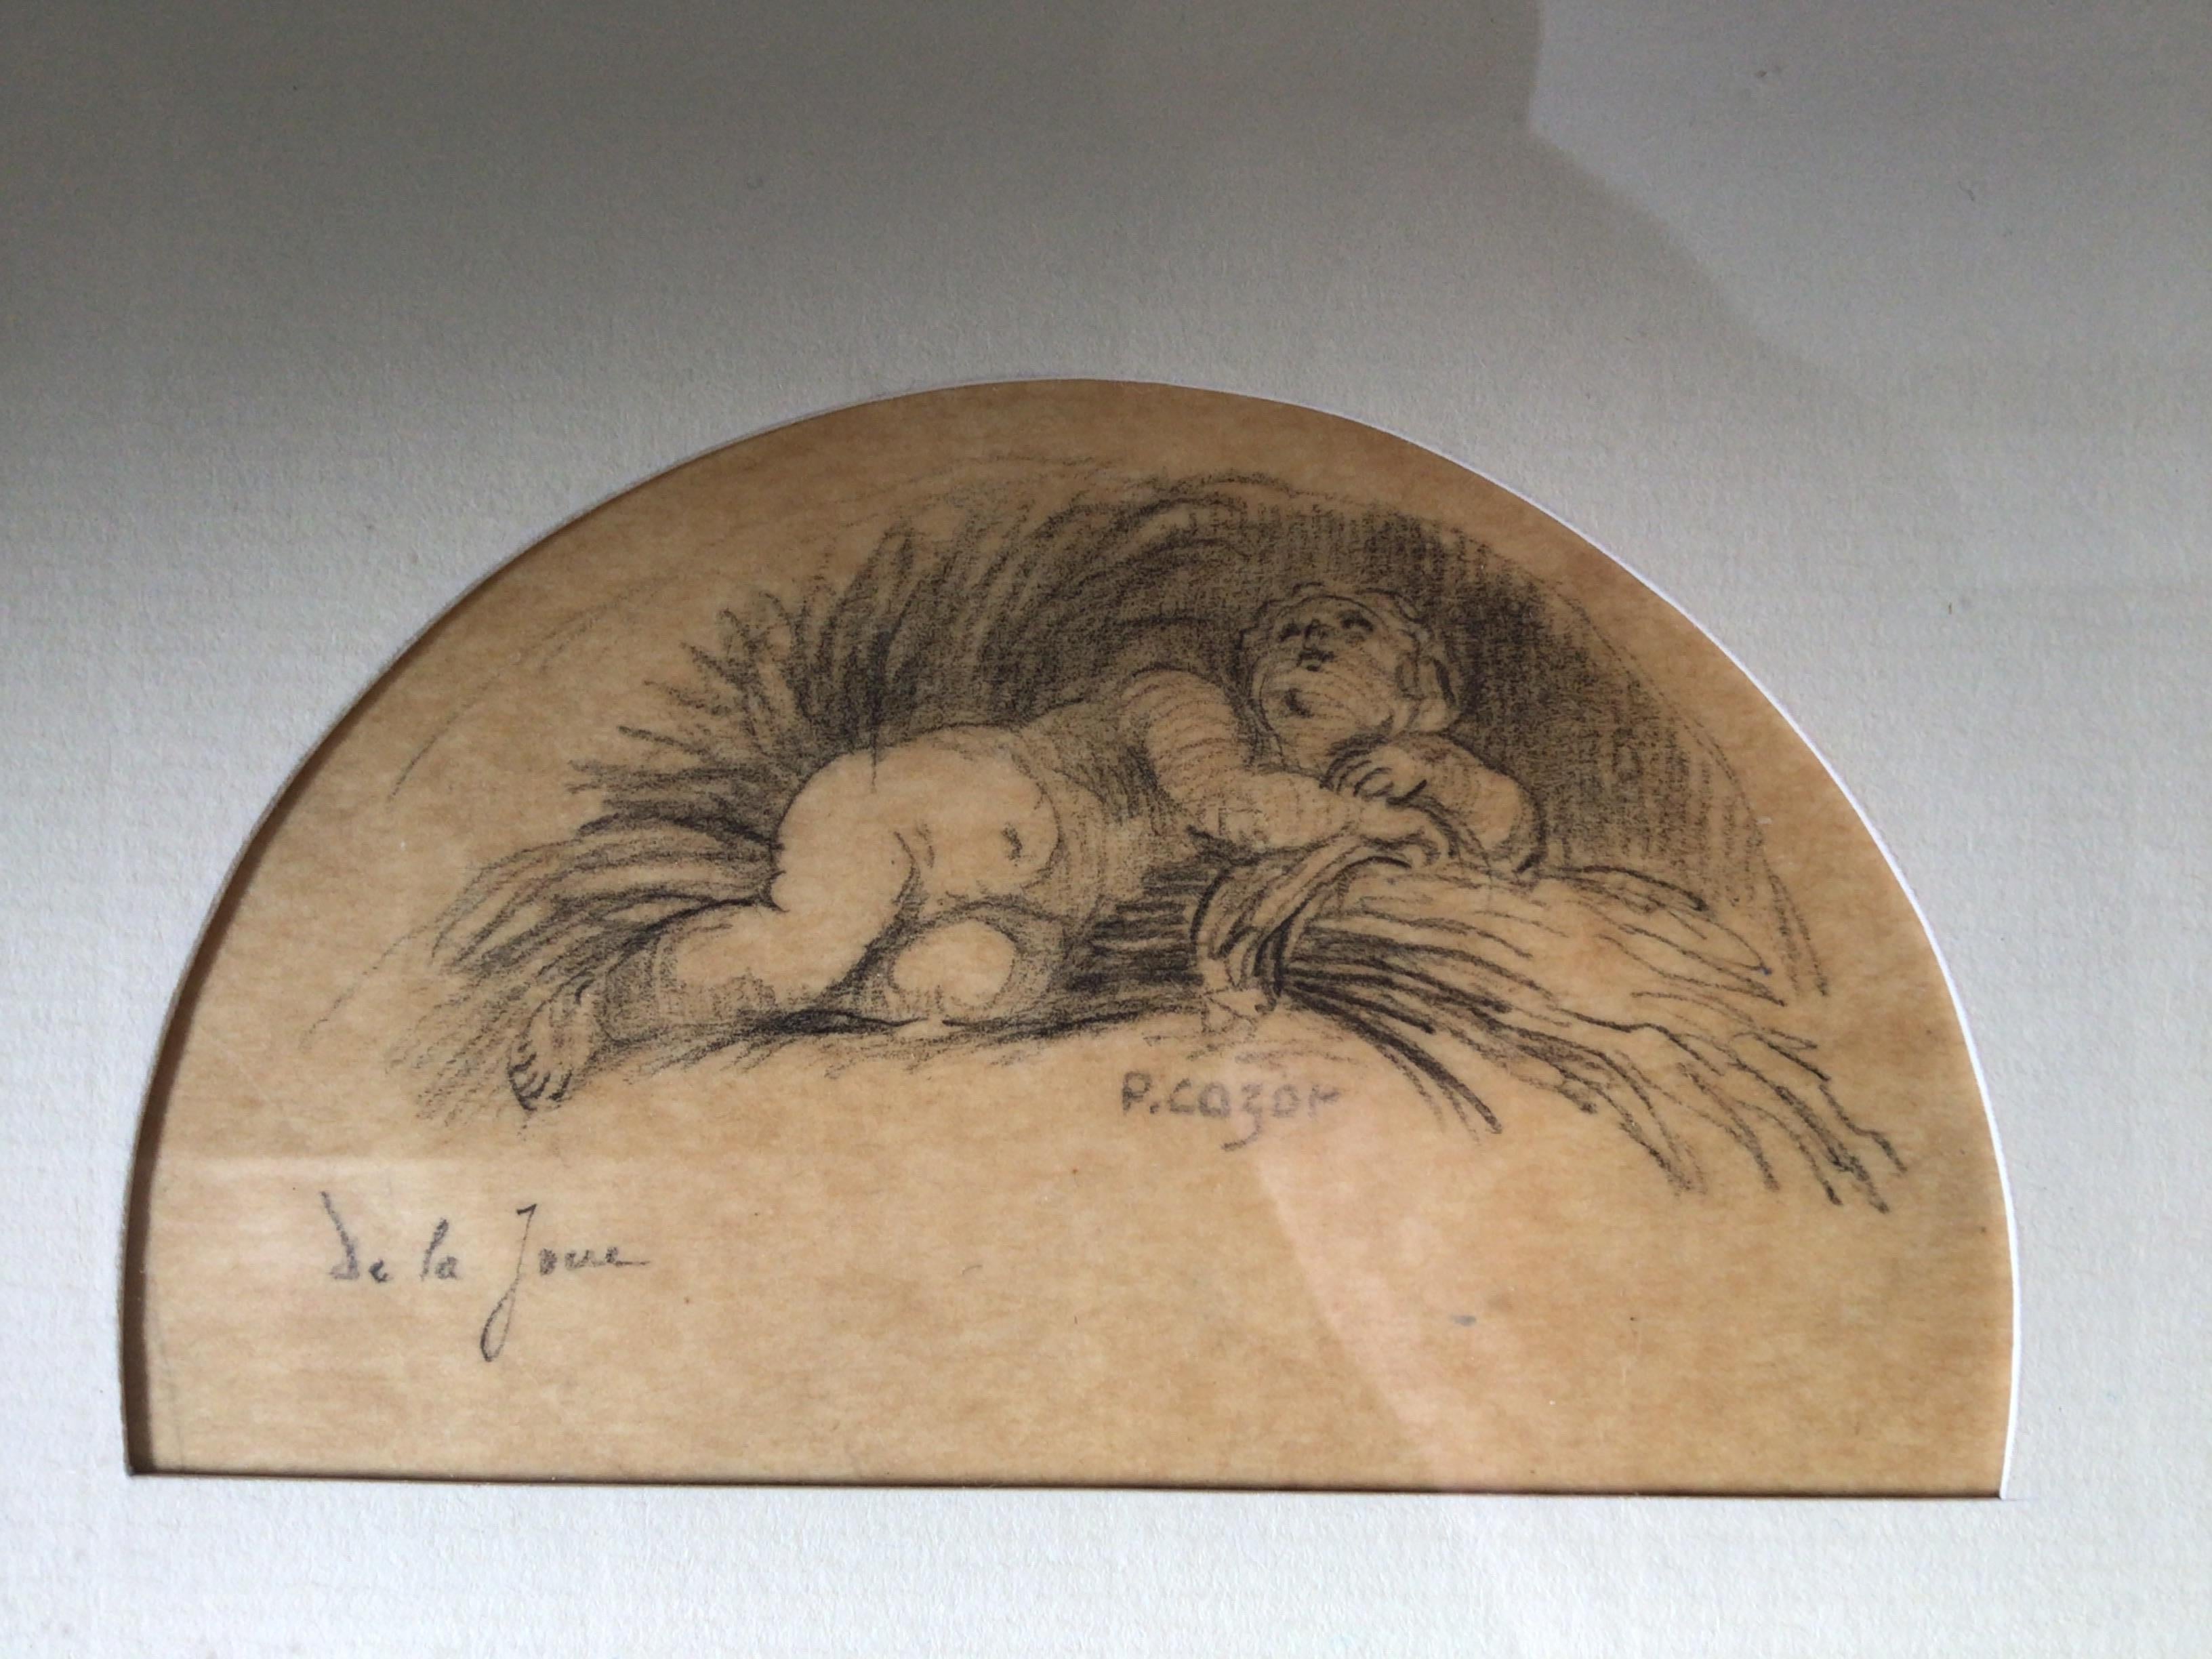 Paper Pair of Sleeping Baby Drawings by P.Cazot For Sale